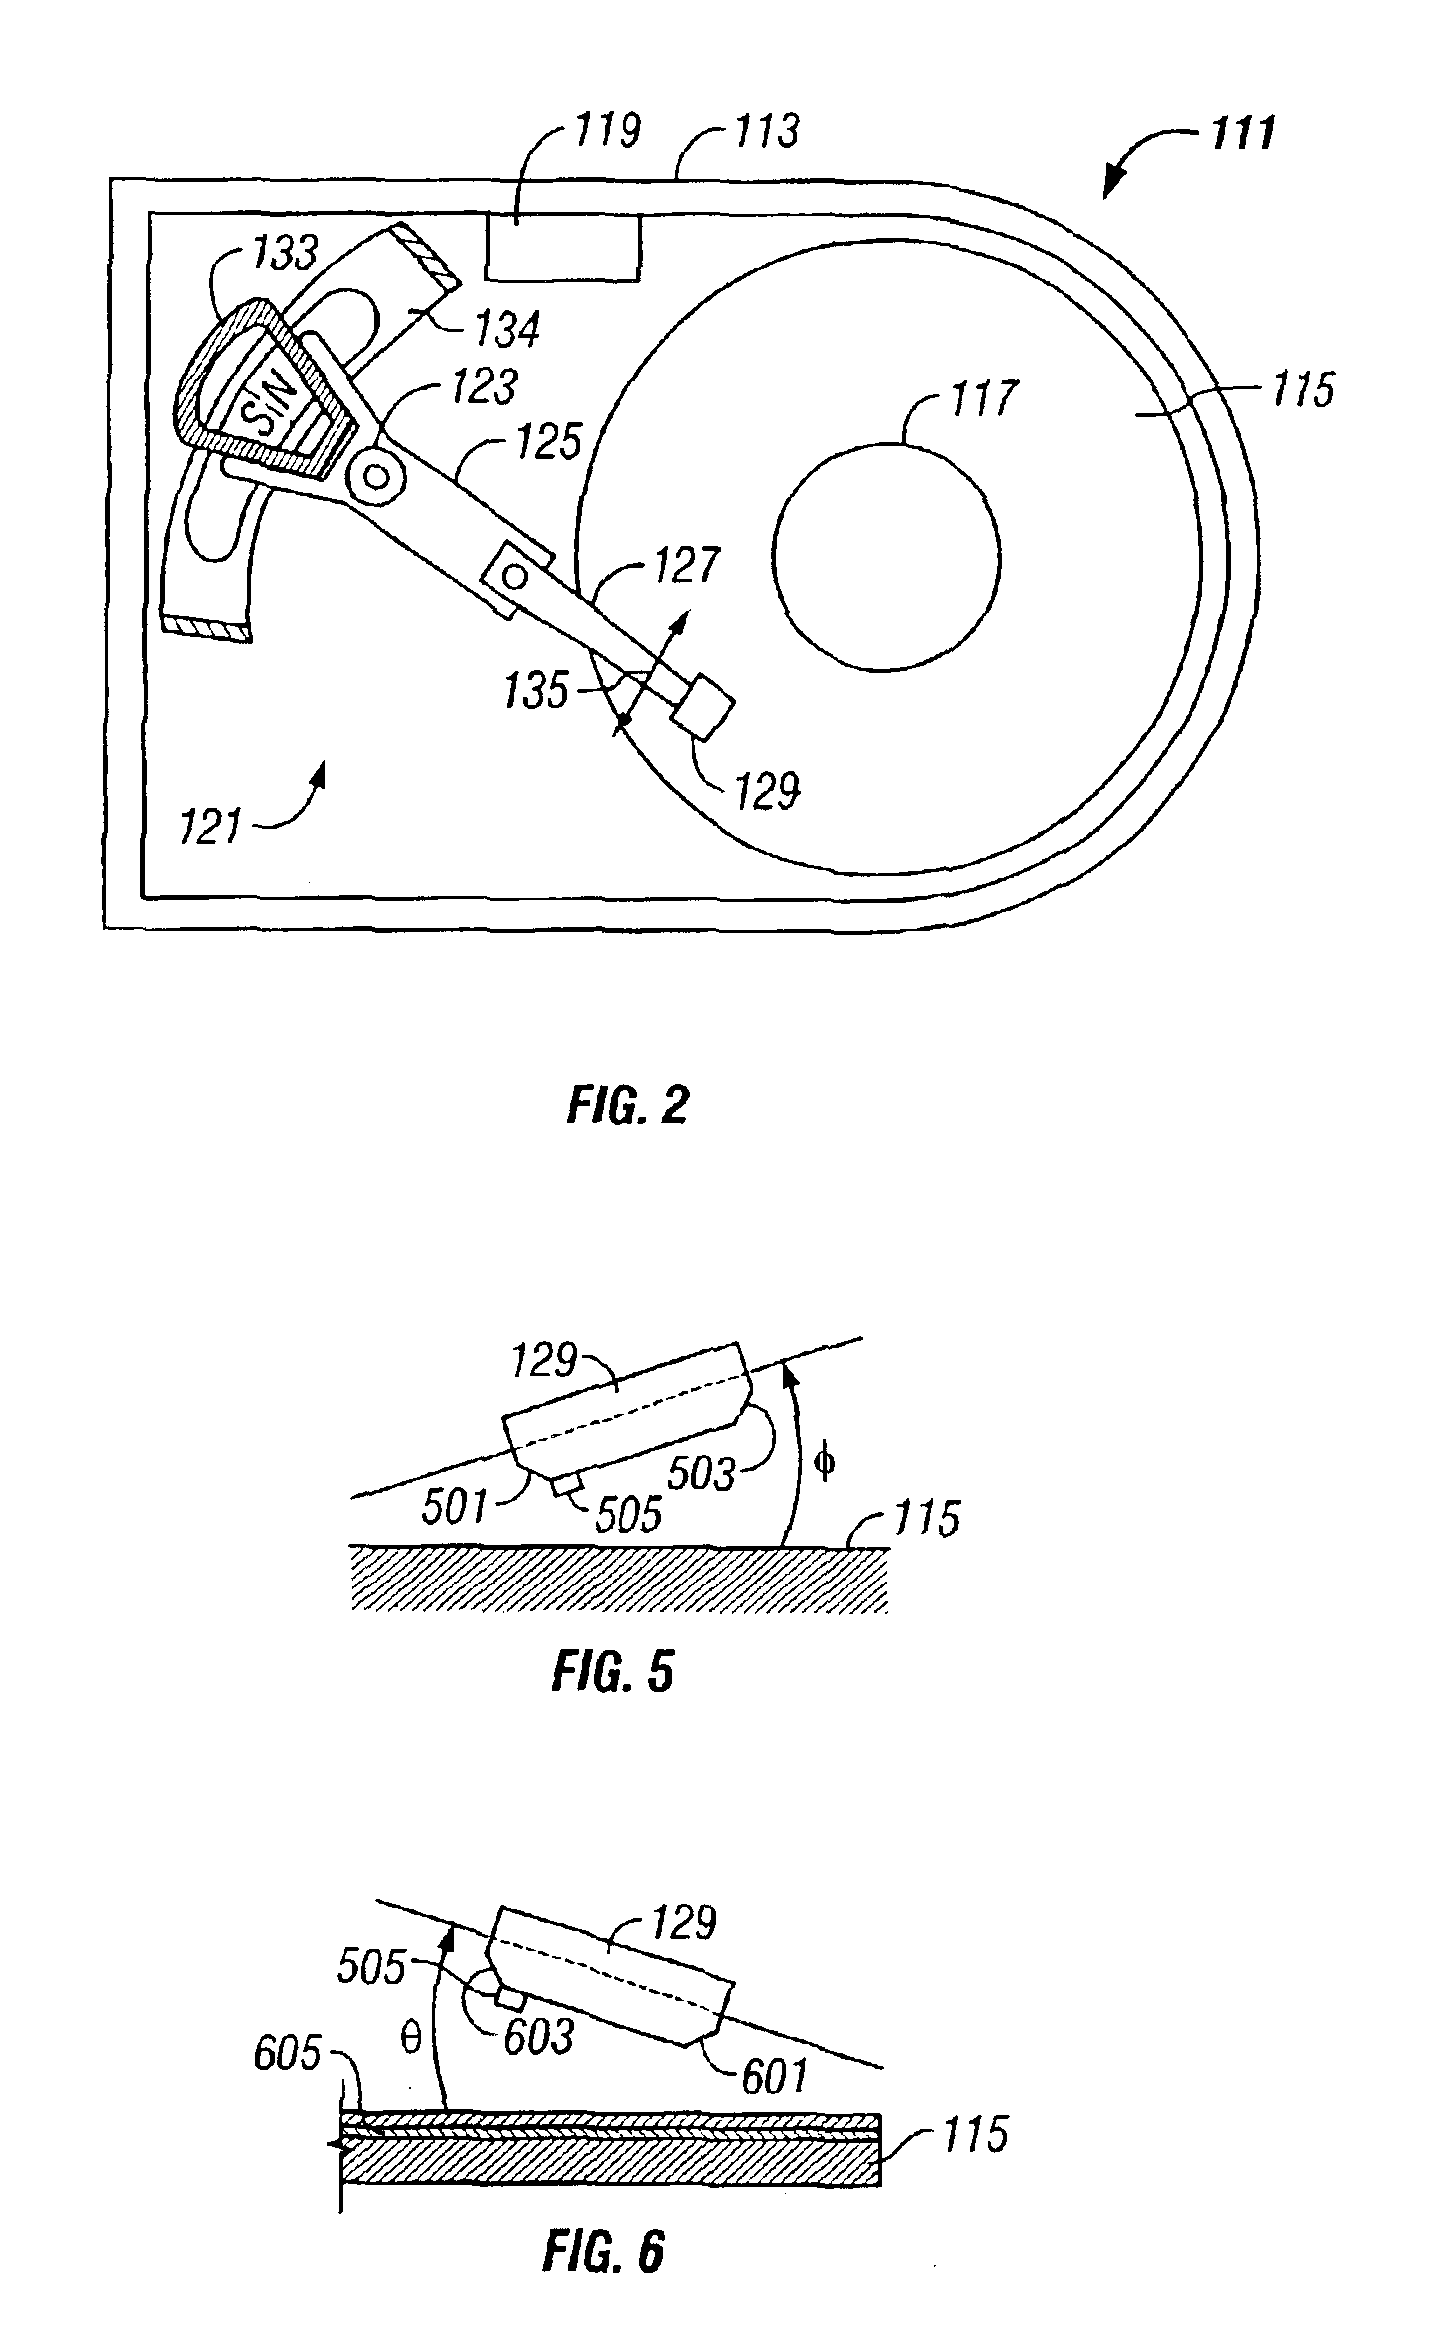 Method and apparatus for recovering load/unload zone real estate on data storage media in data storage devices to increase a data storage capacity thereof